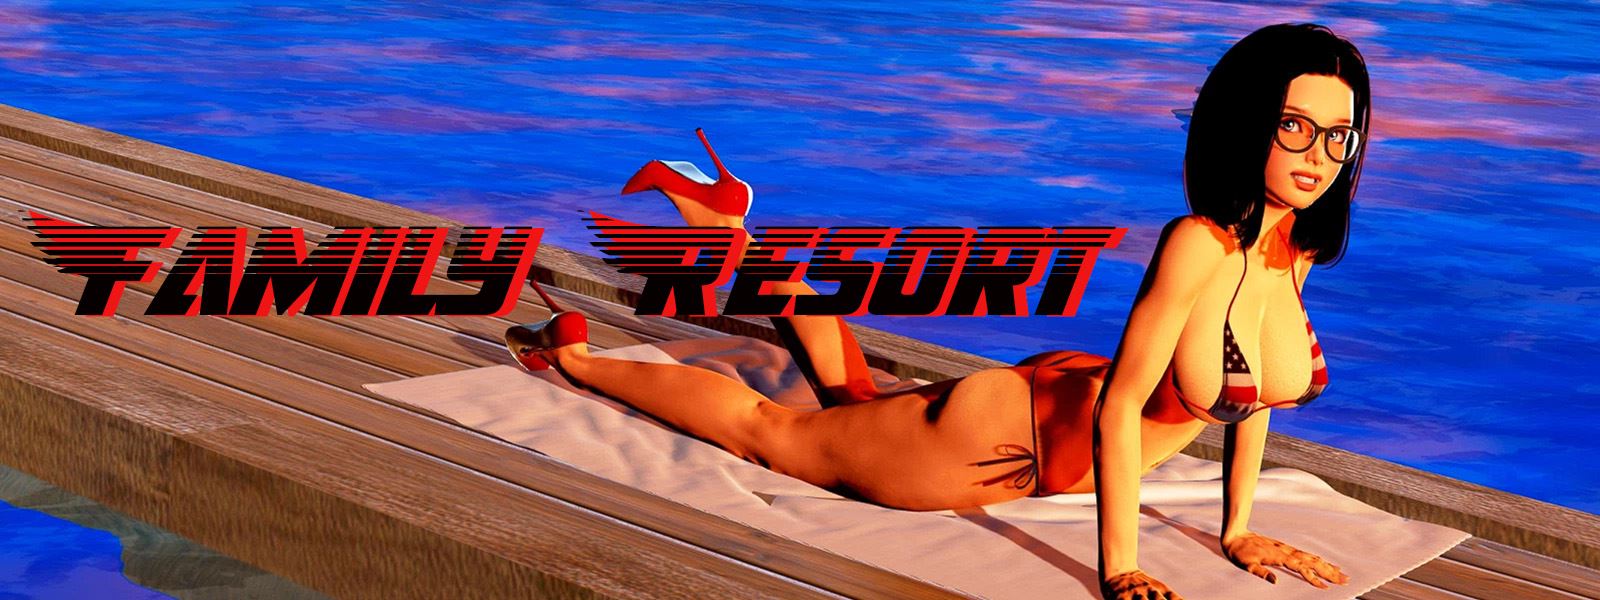 Family Resort porn xxx game download cover